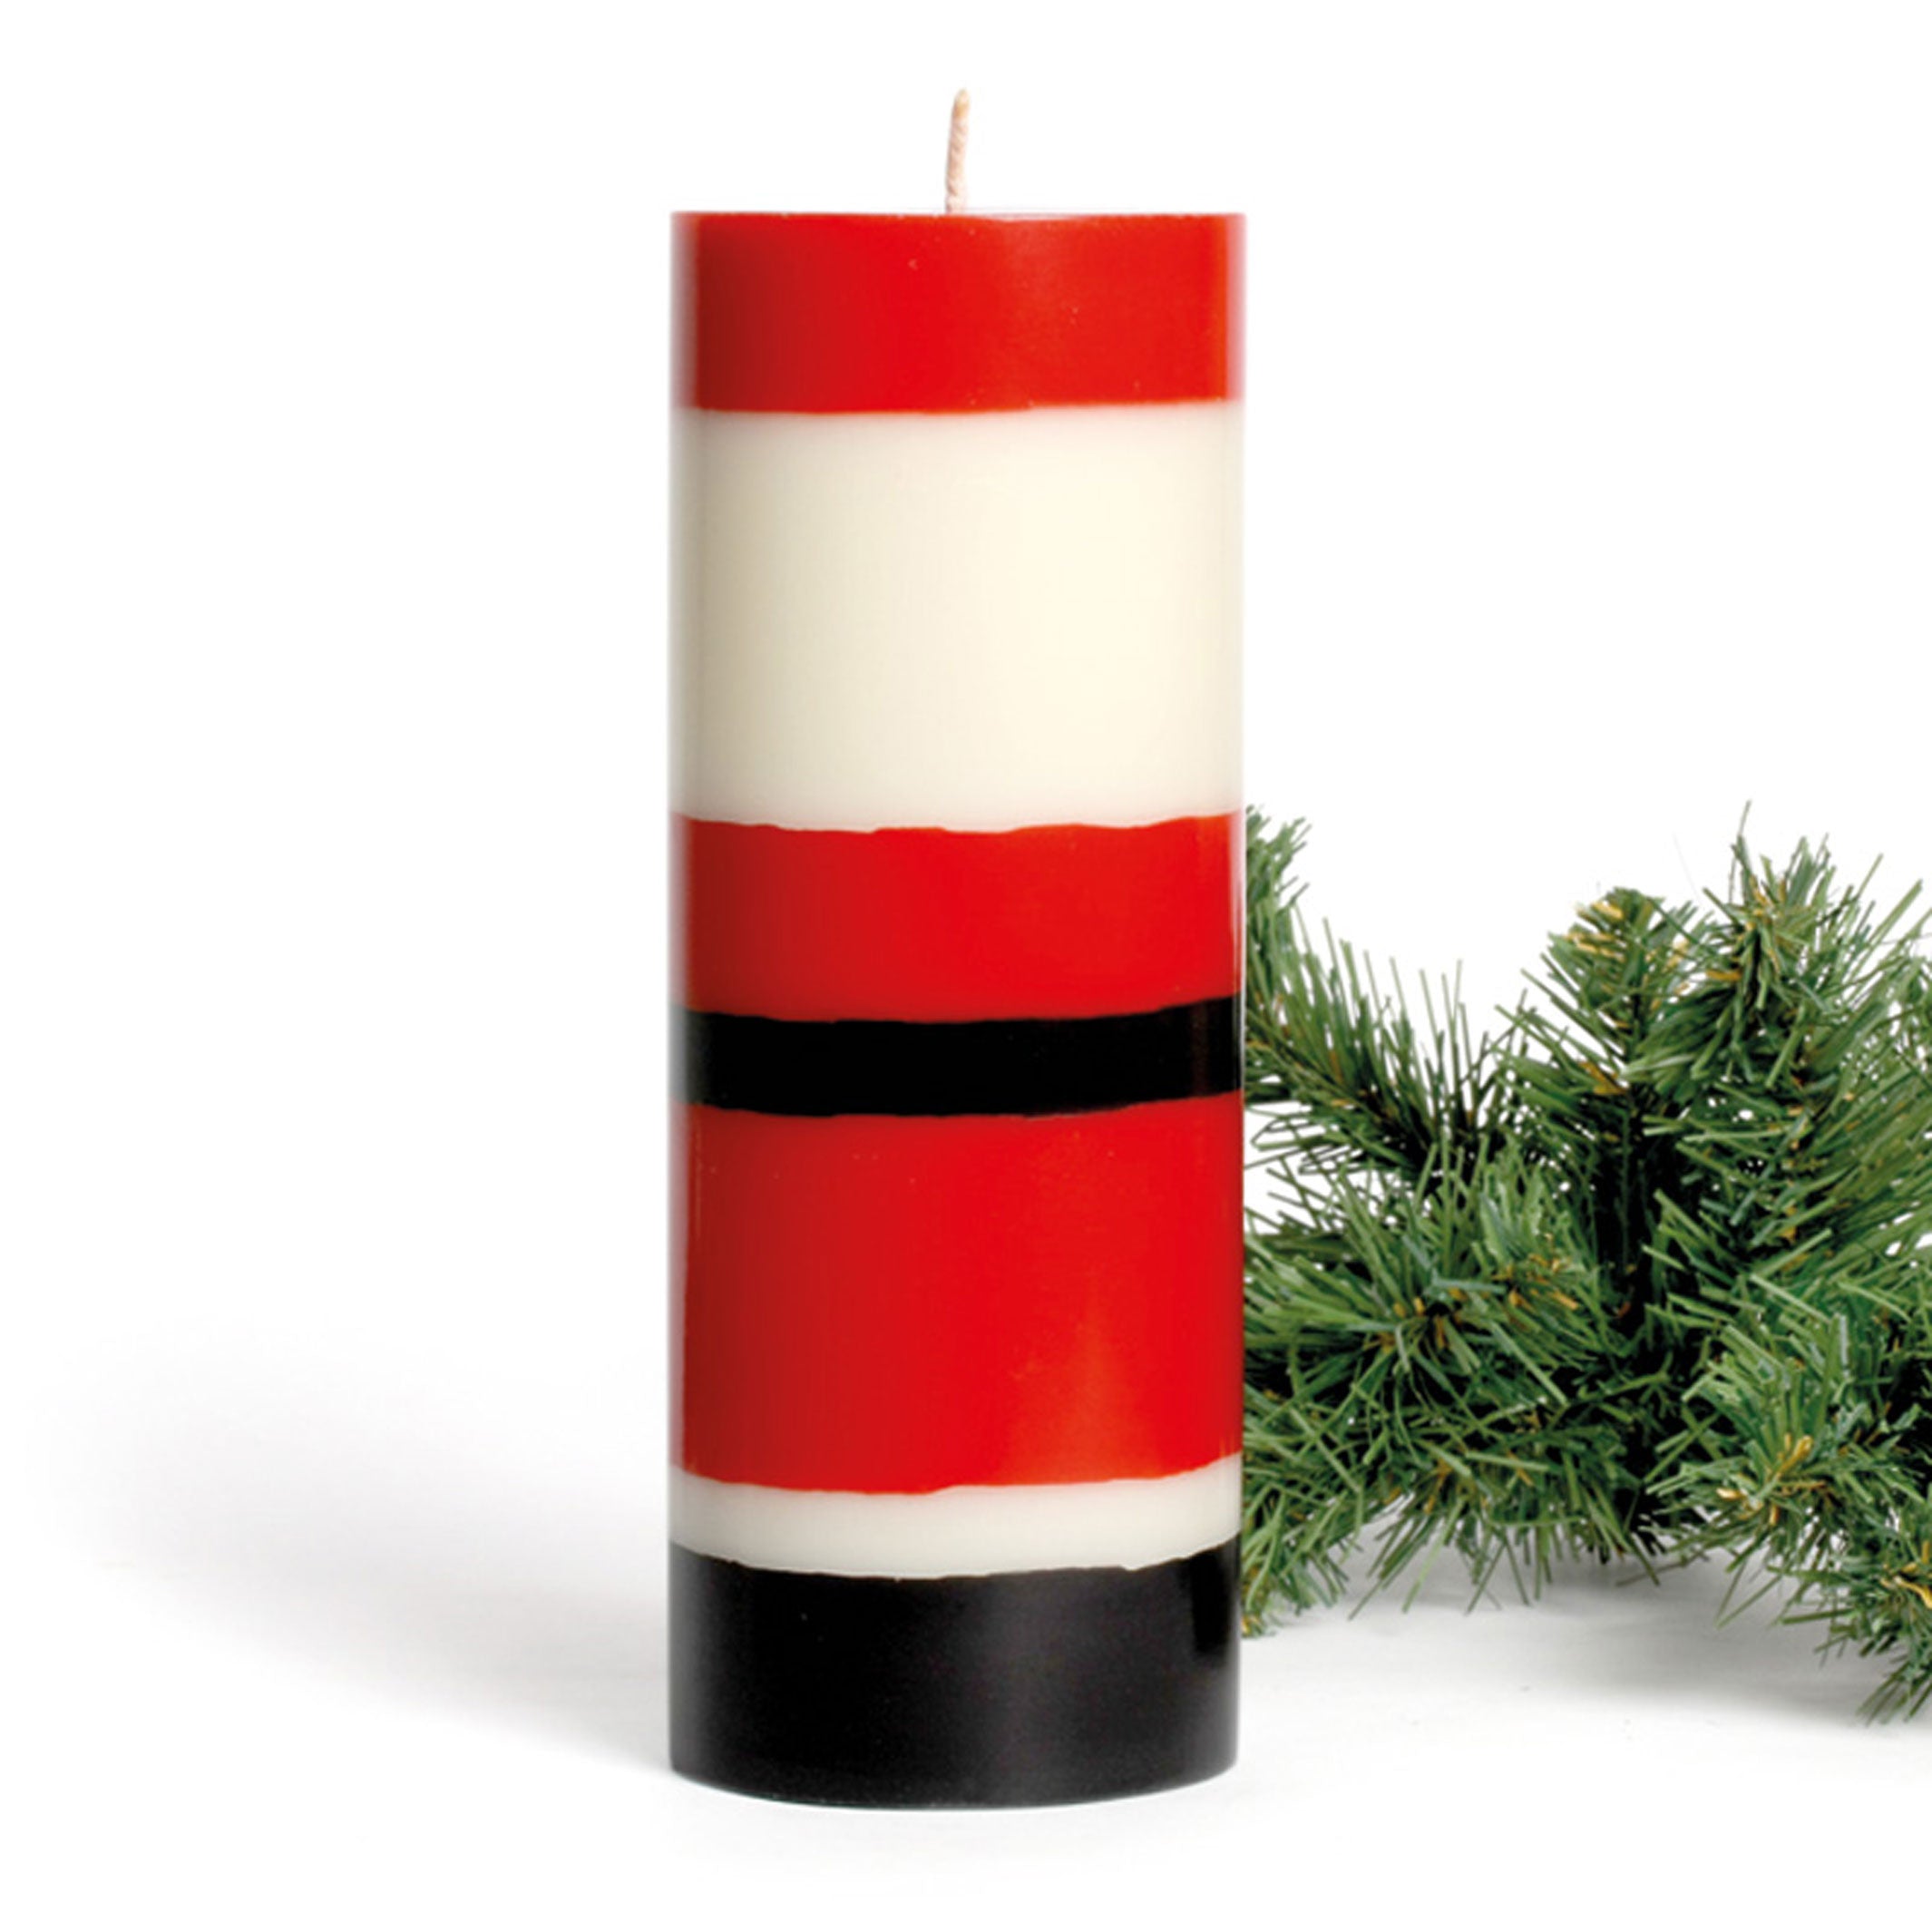 SANTA CLAUS | Big PILLAR CANDLE | 73 hrs burn time | not the girl who misses much